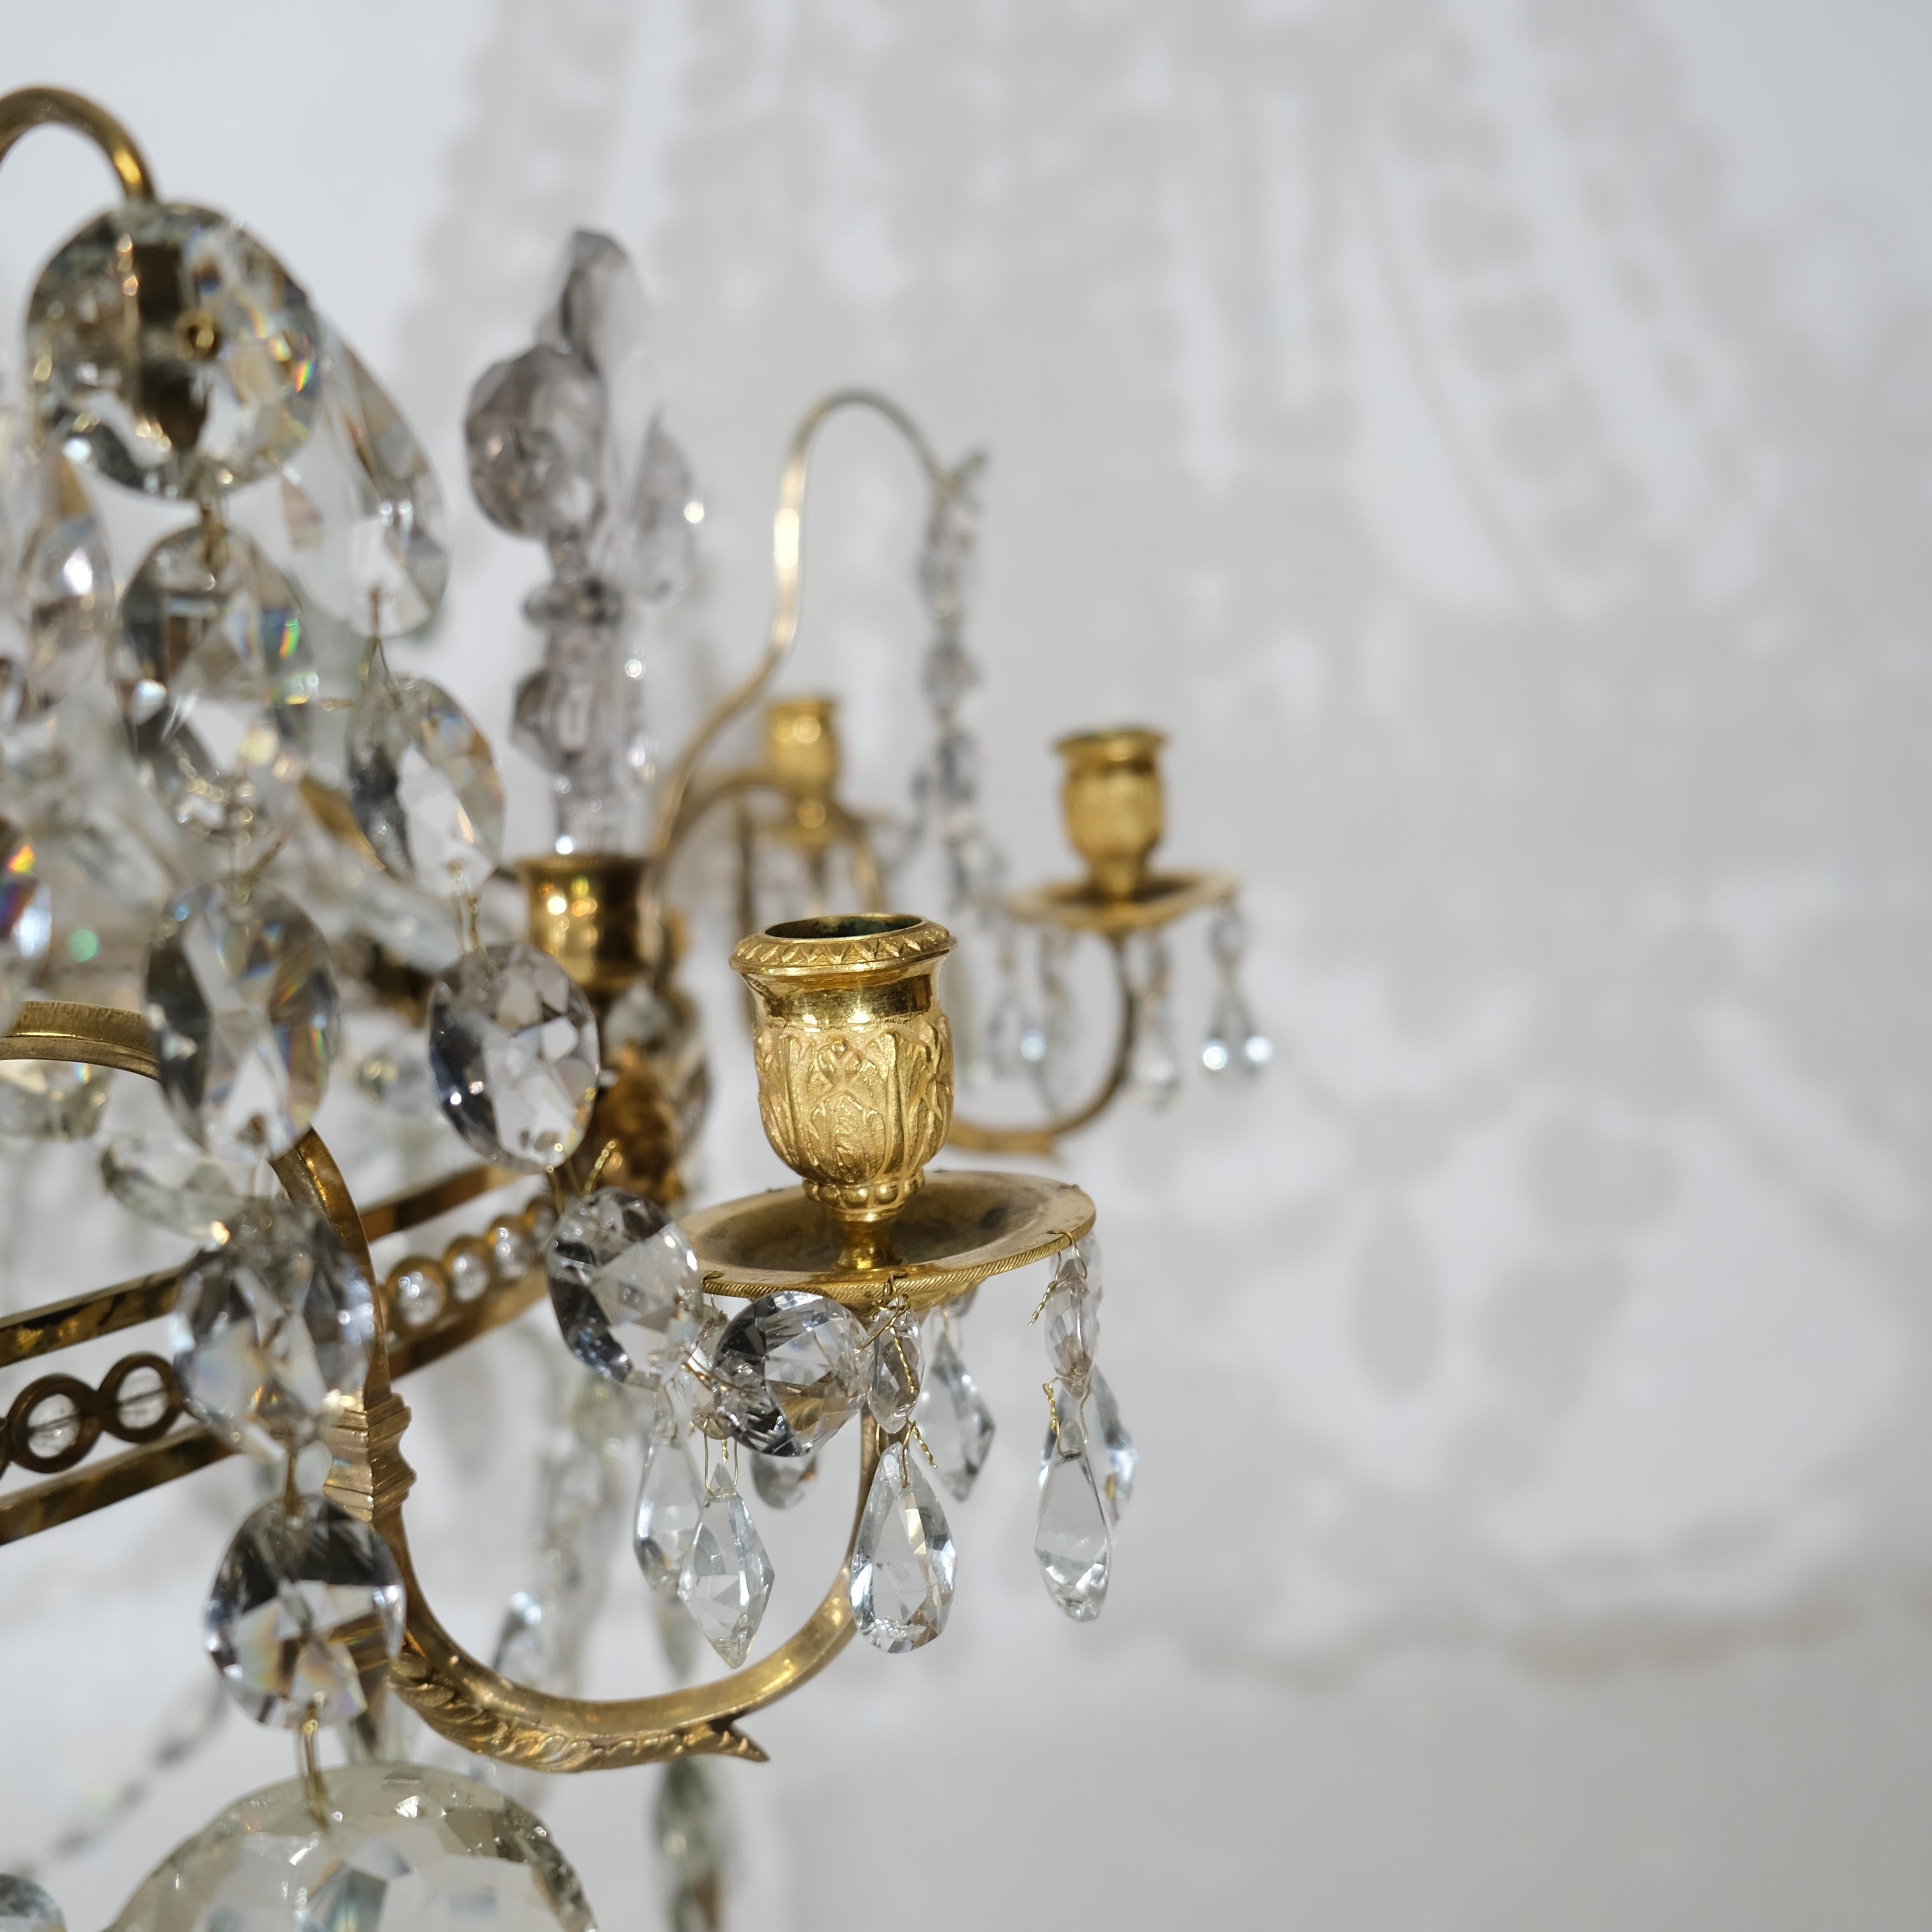 Gilt Magnificent Antique Important and large 18th c chandelier For Sale